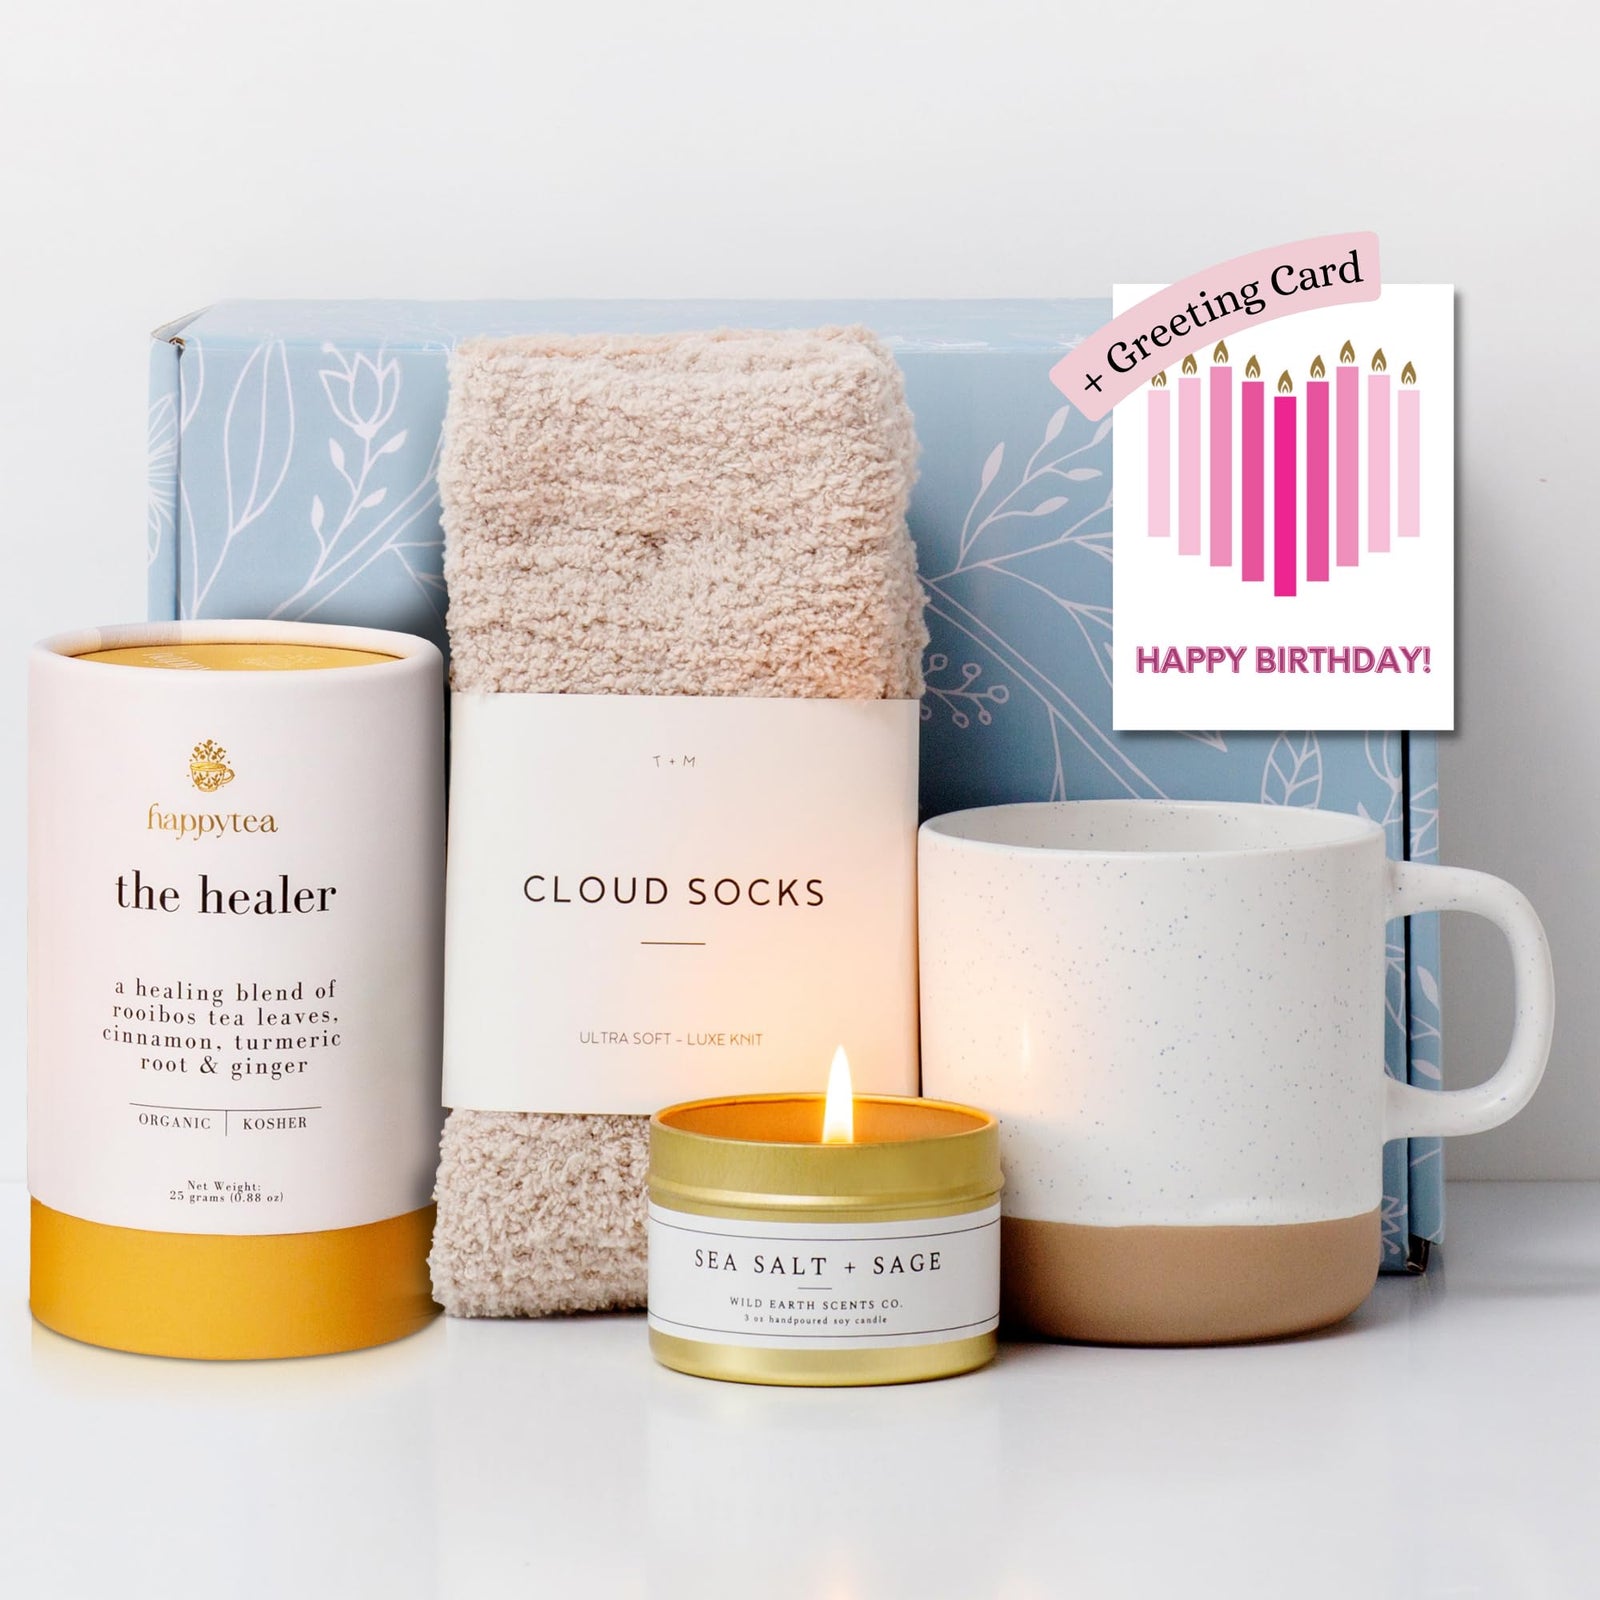 Unboxme Luxe Self Care Gift Box for Women | Premium Care Package with Hugs Card | Soothing Spa Basket for Relaxation and Wellness | Mother's Day Gifts